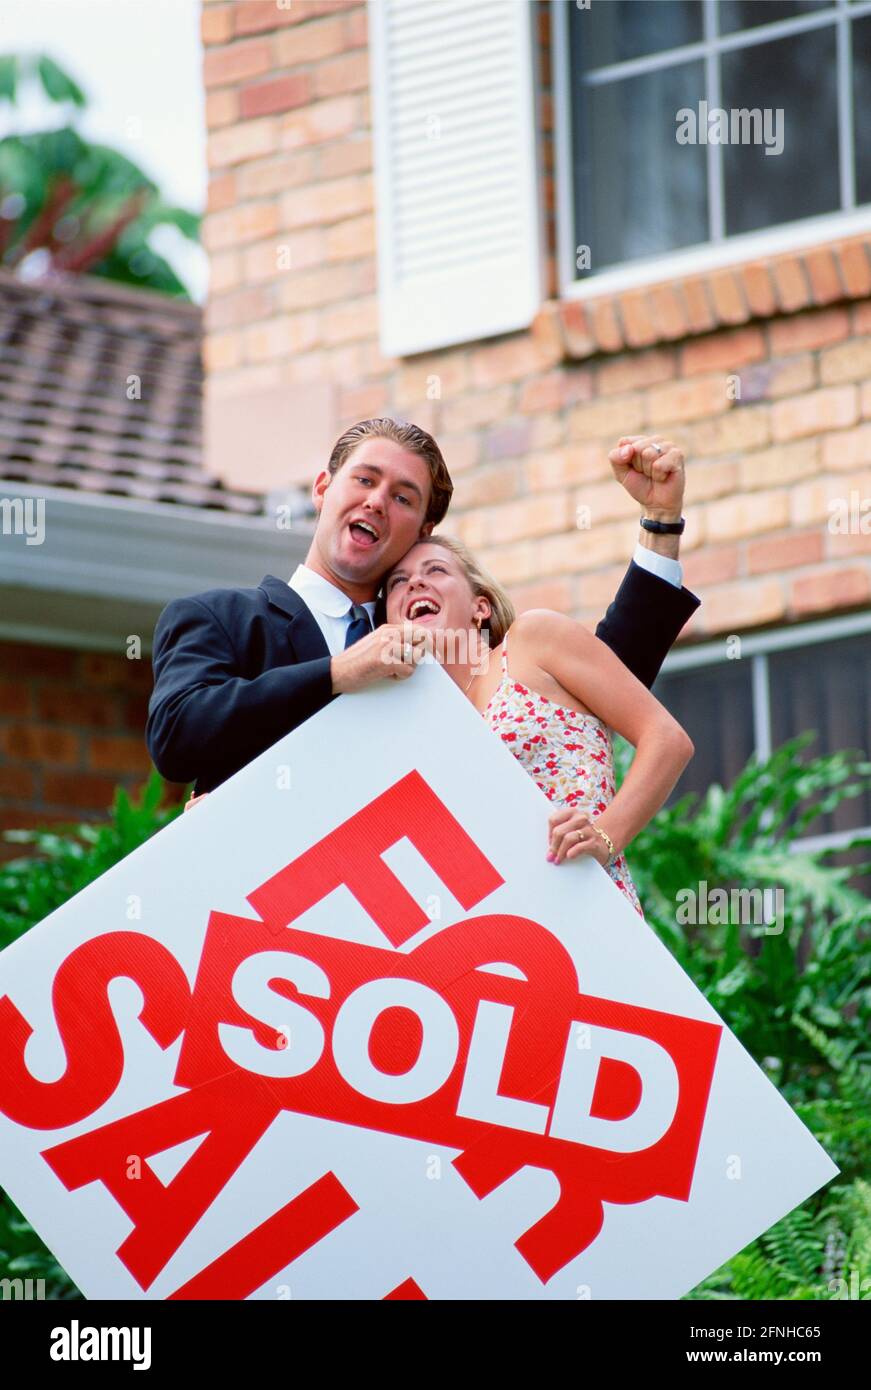 Australia. Lifestyle. Young couple outside newly purchased house. Happy home purchase. Stock Photo